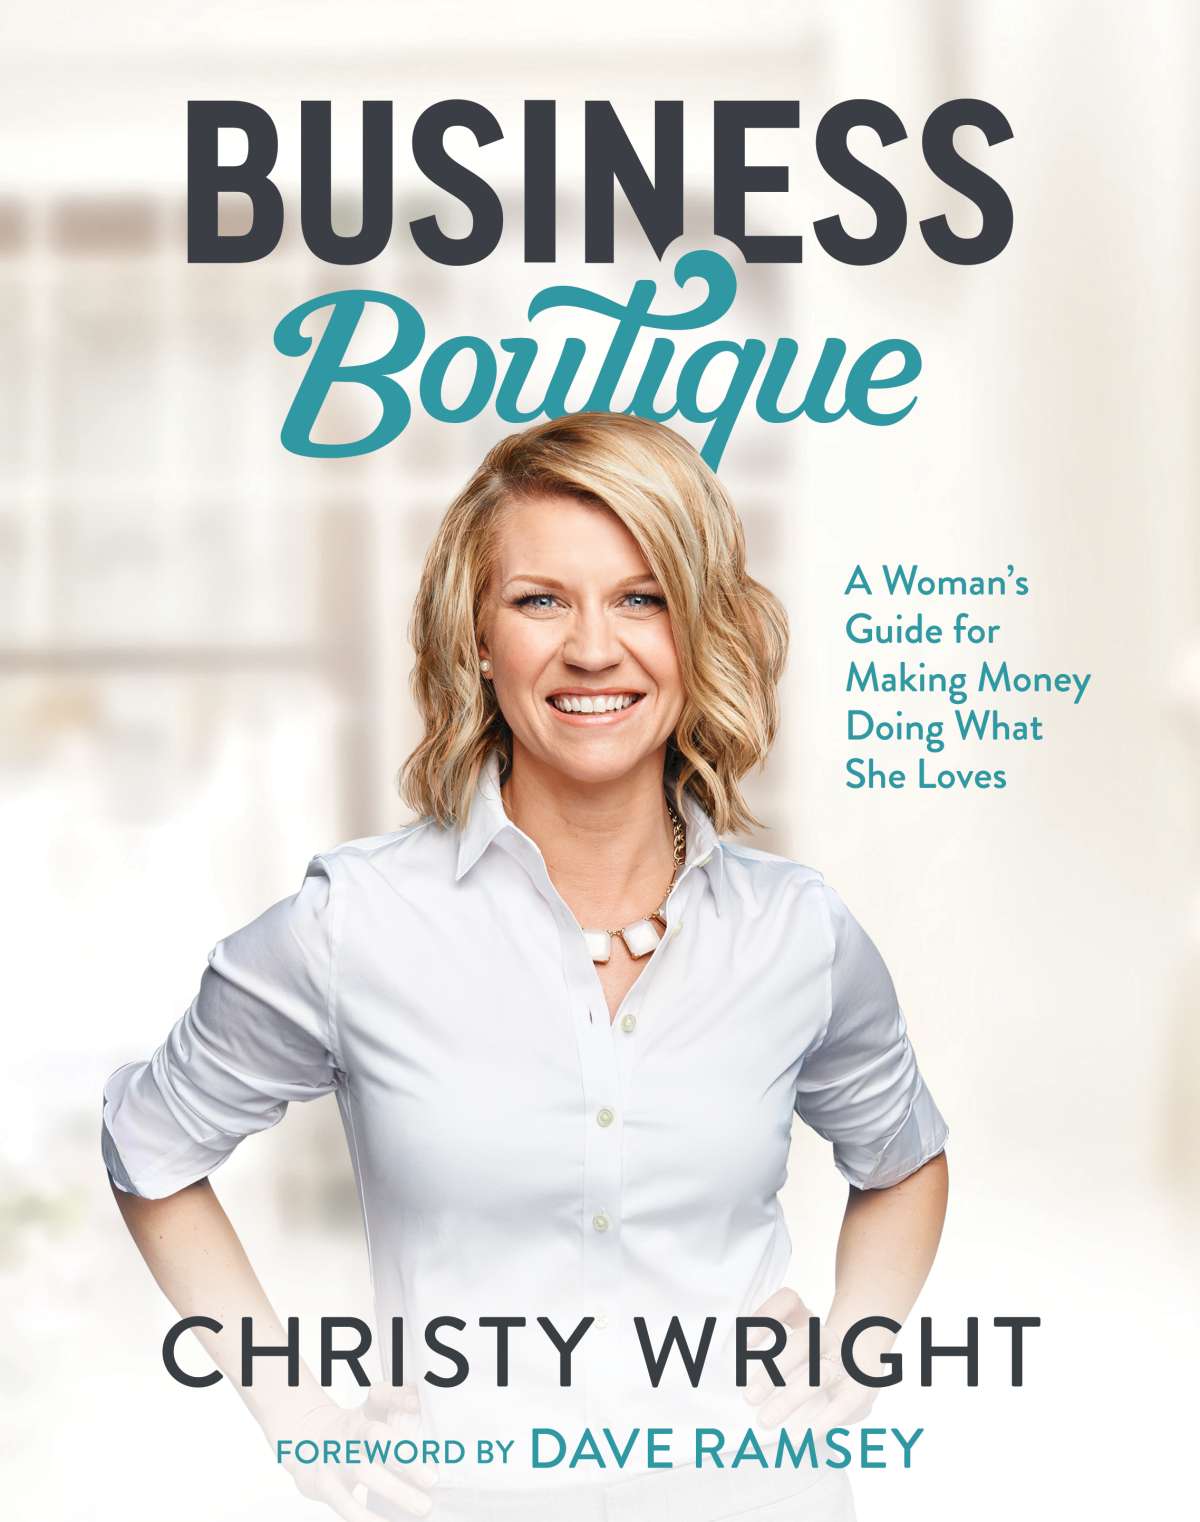 Christy Wright book for working mothers 